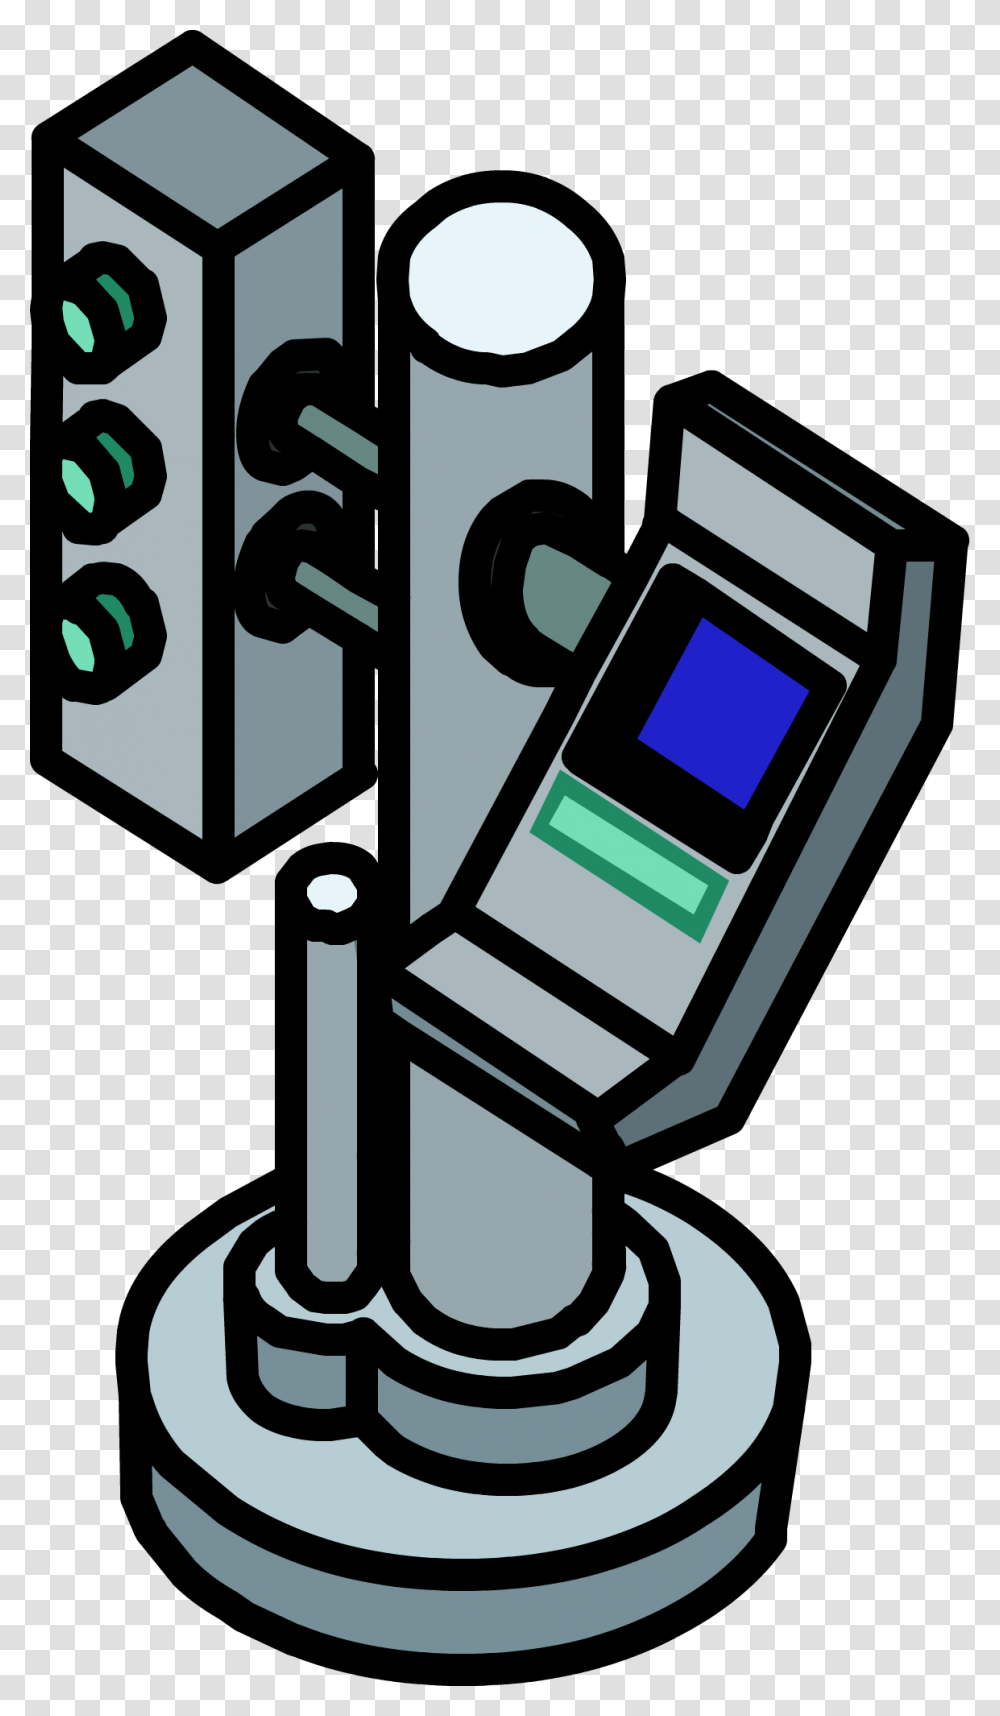 Holonet Tracking Console Icon Download, Wristwatch, Kiosk, Digital Watch Transparent Png